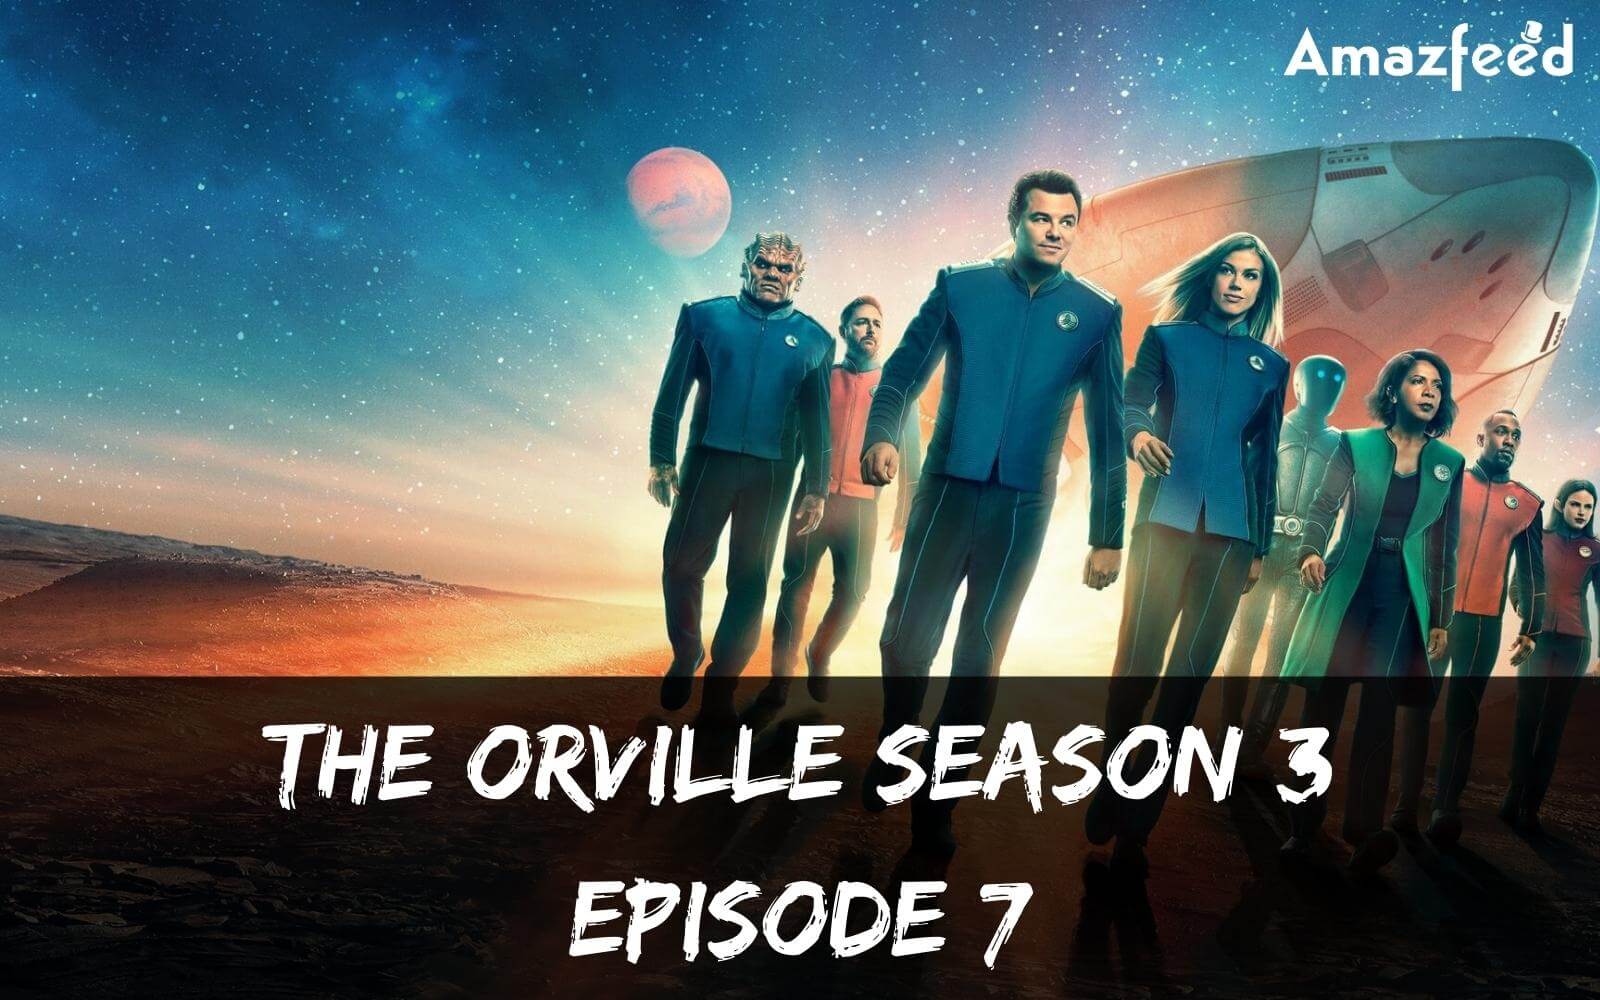 The Orville Season 3 Episode 7: Countdown, Release Date in Australia, UK, And USA